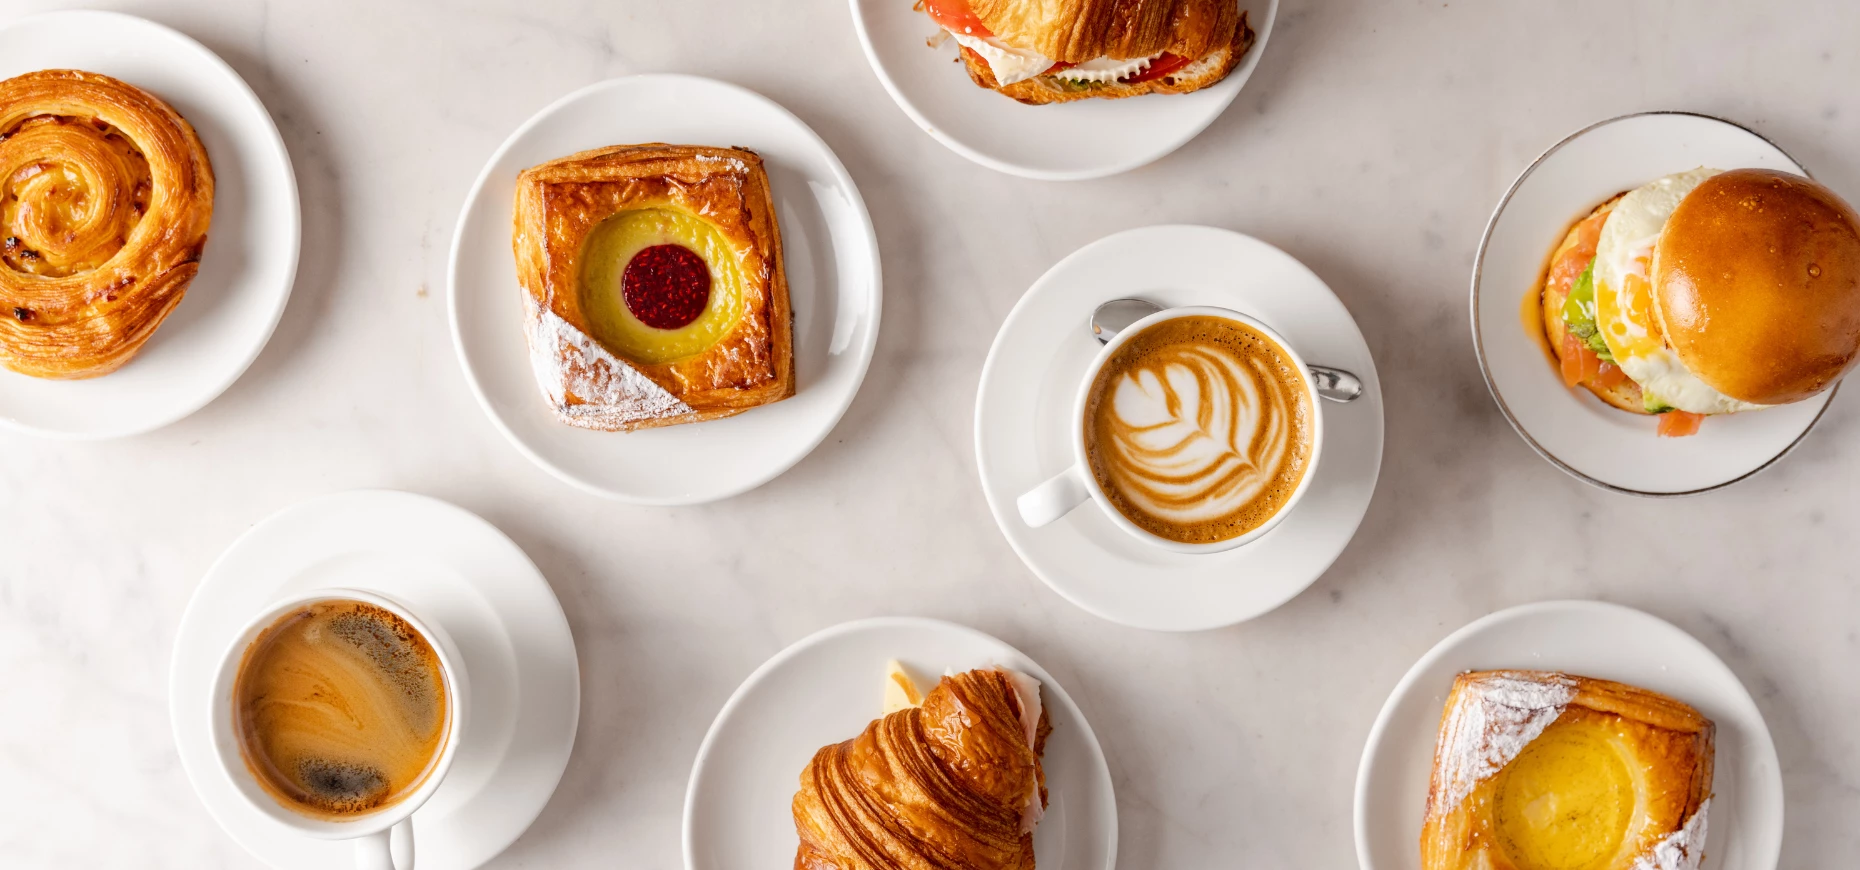 A selection of pastries from Le Deli.